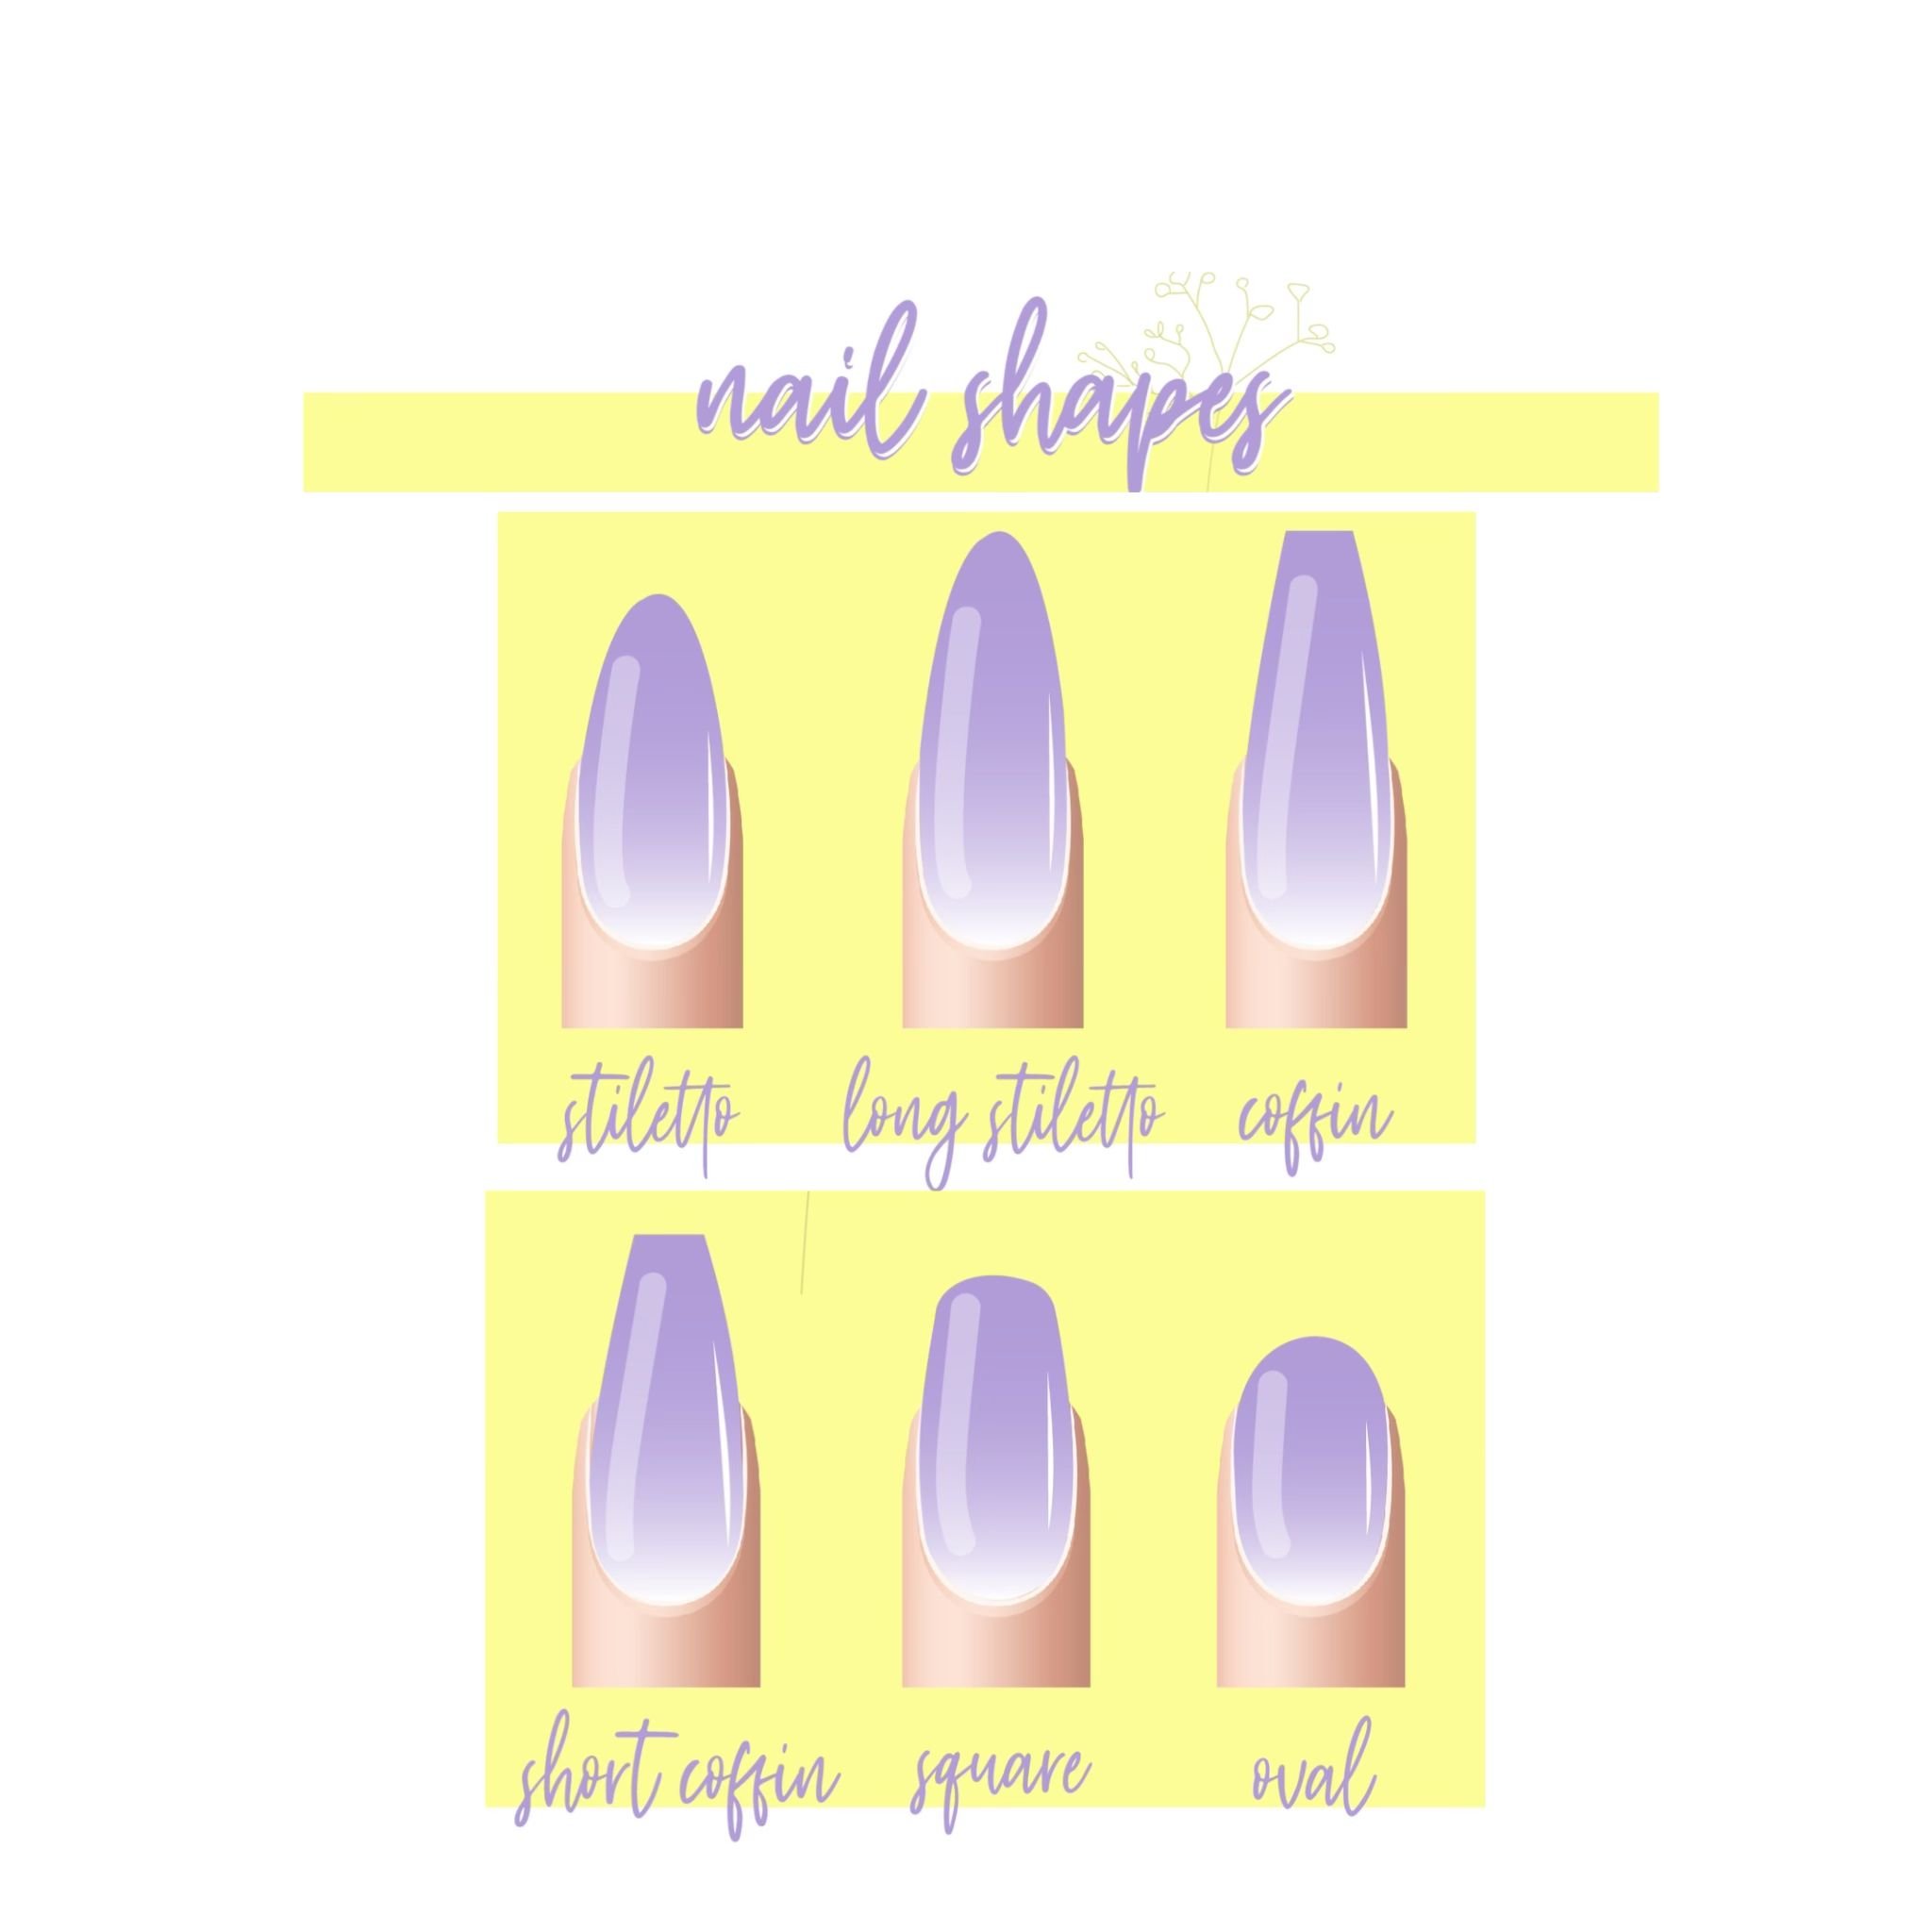 How to Shape Acrylic Nails: A Guide on Acrylic Nail Shapes